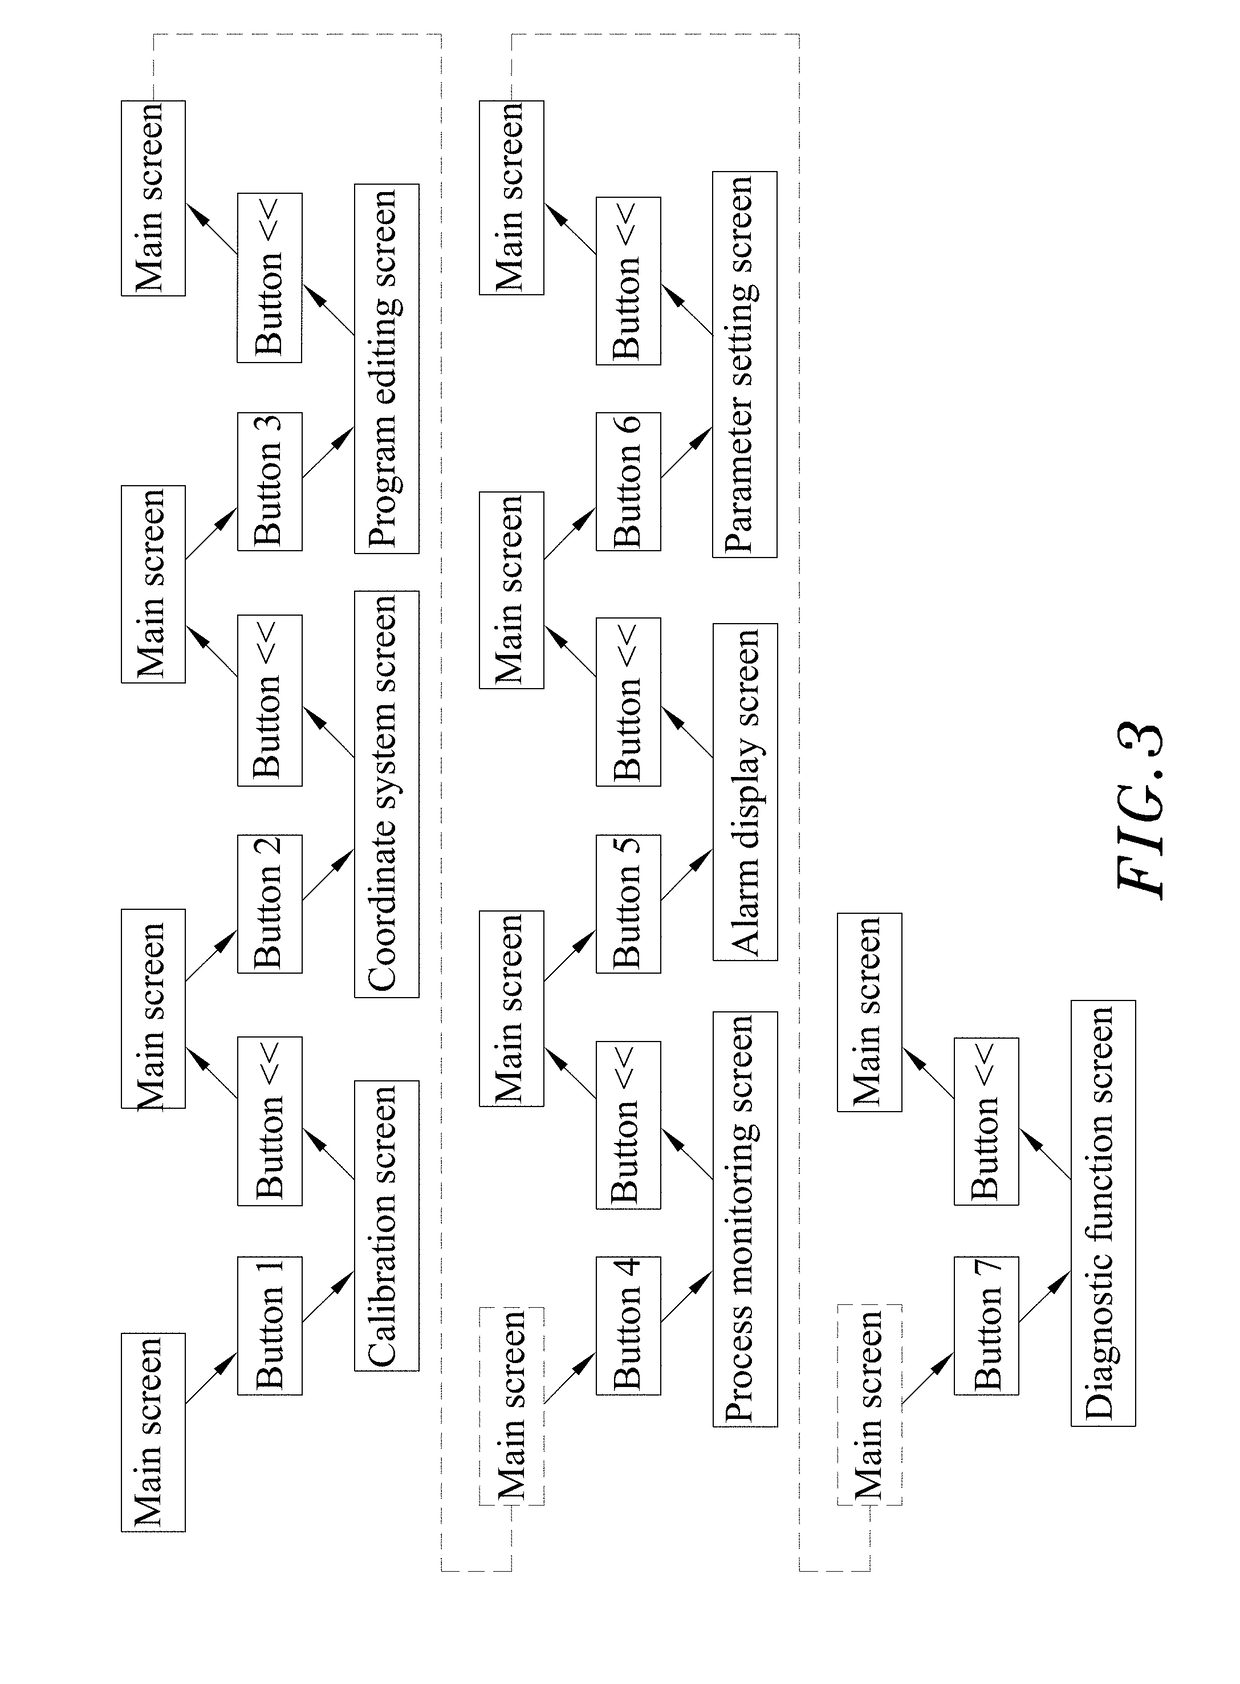 System module of simulating machine operation screen based on non-invasive data-extraction system